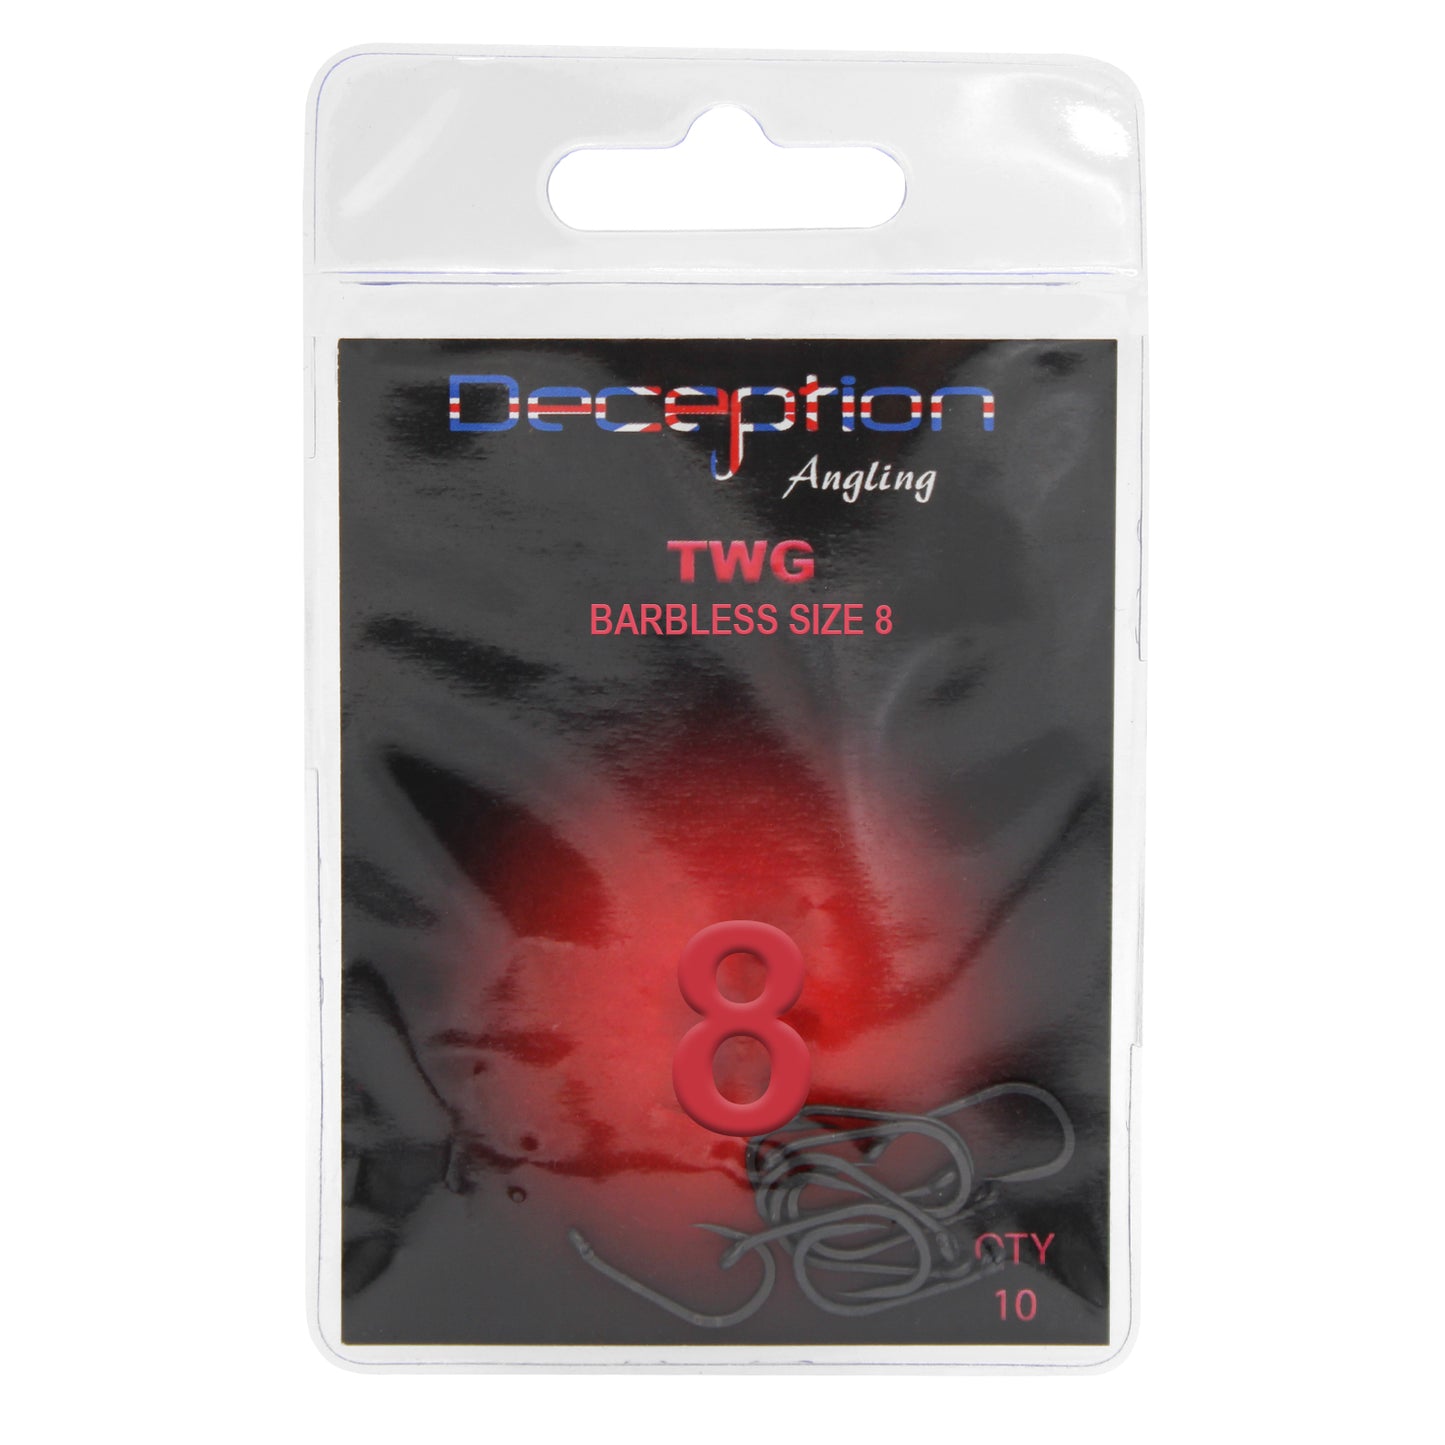 Deception Angling TWG Barbless Fishing Hooks Pack of 10 - Size 8